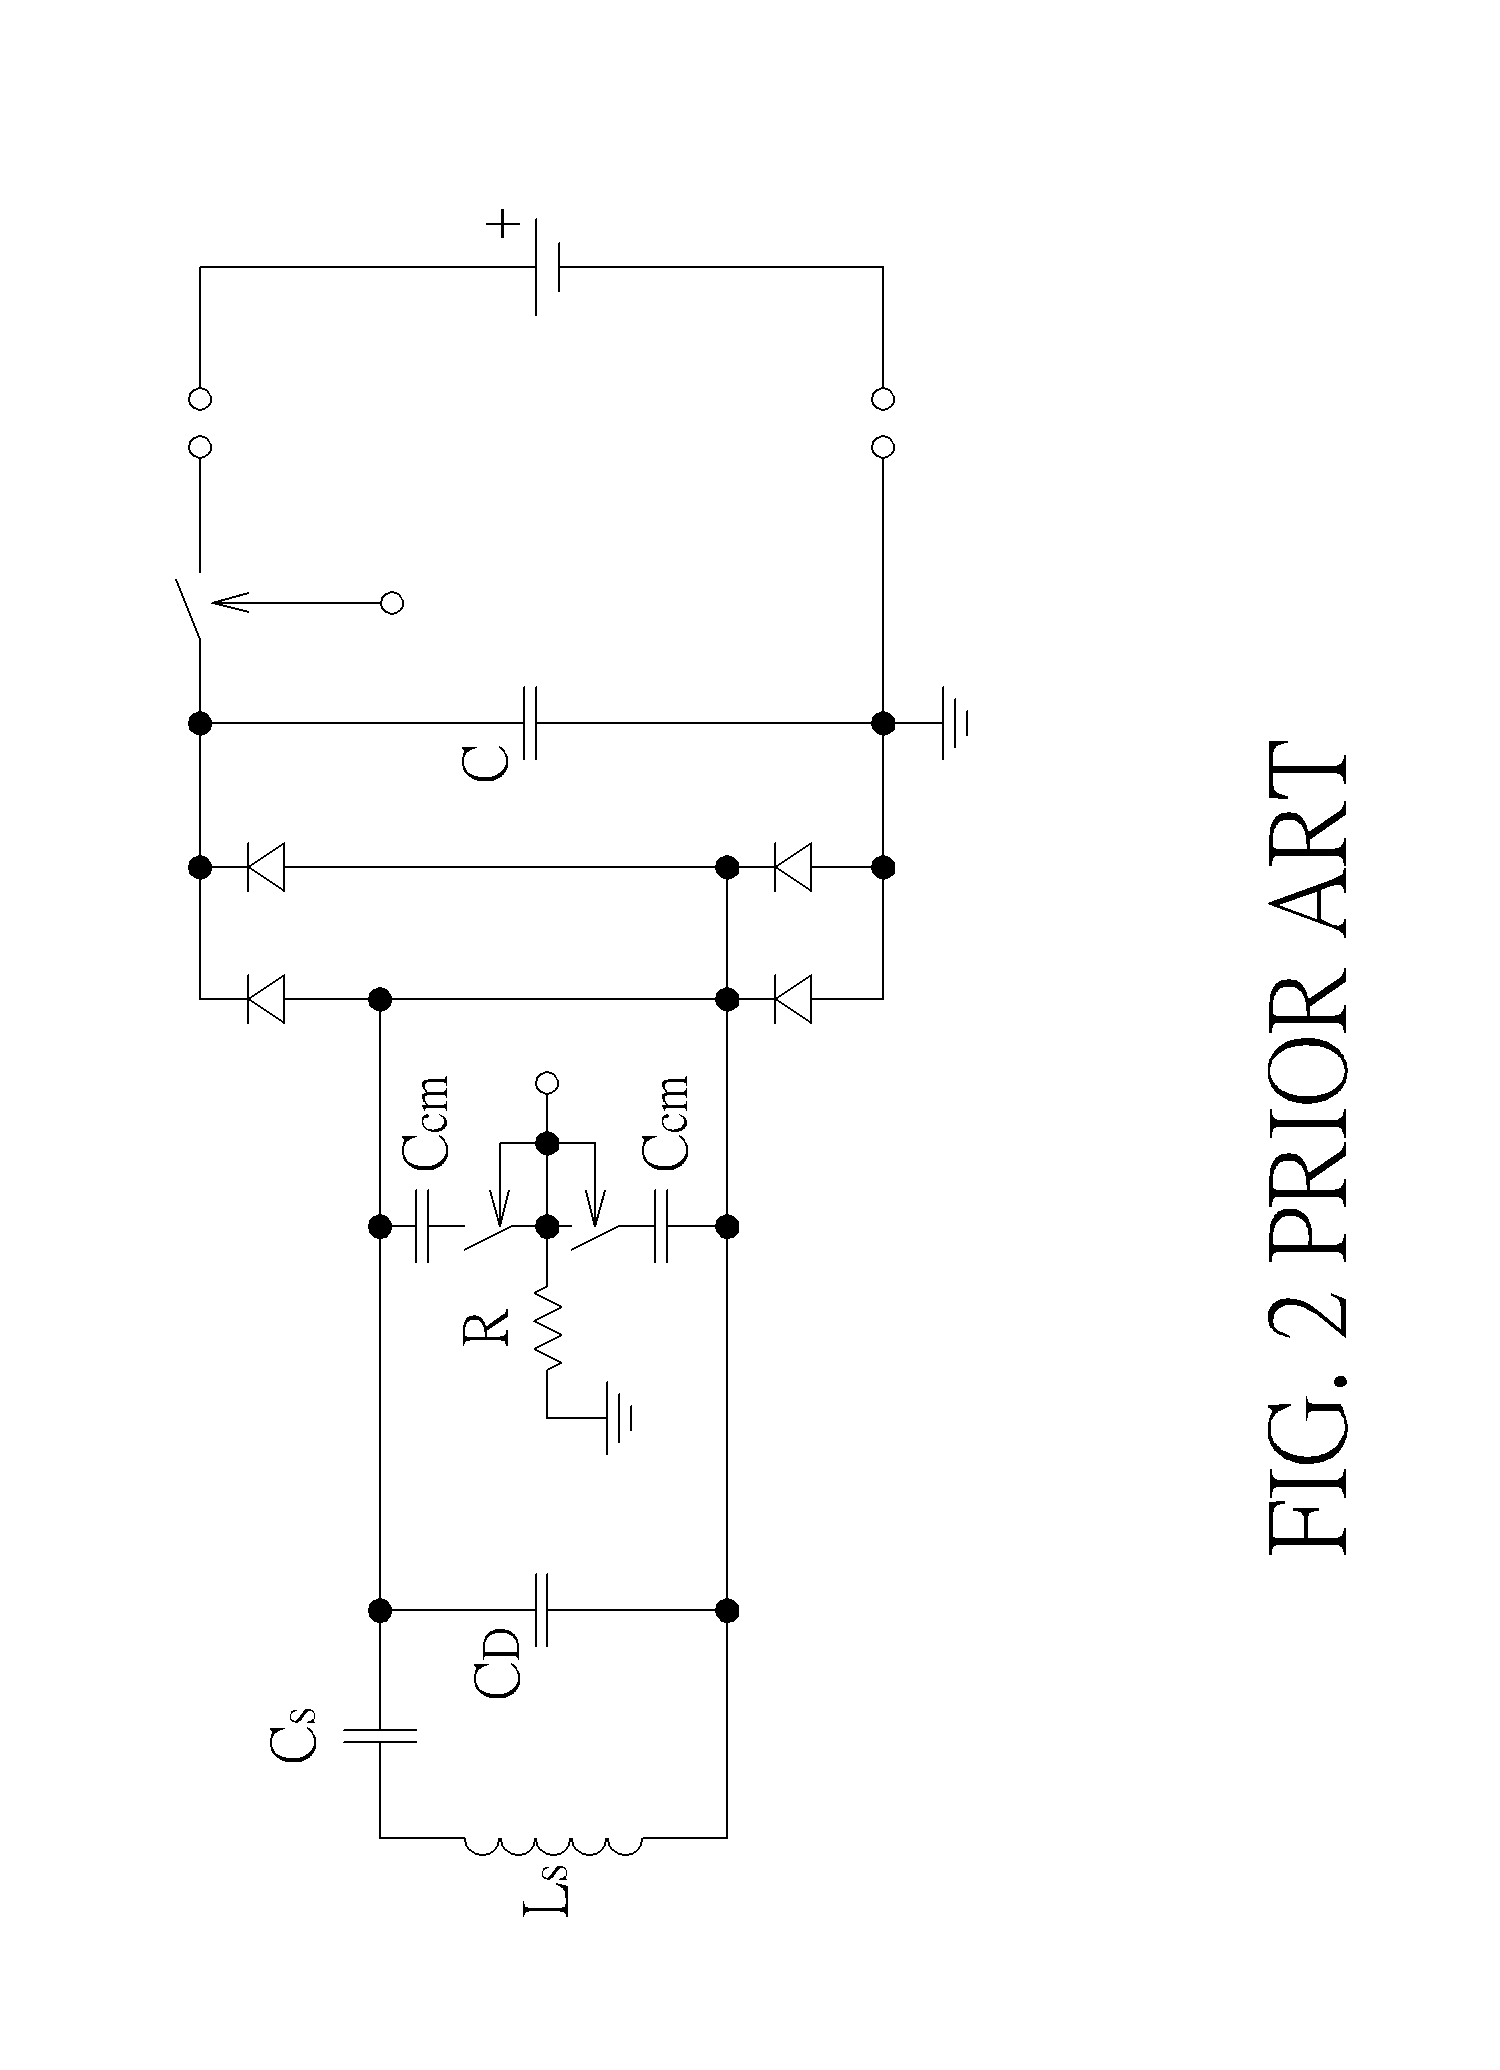 Operating clock synchronization adjusting method for induction type power supply system